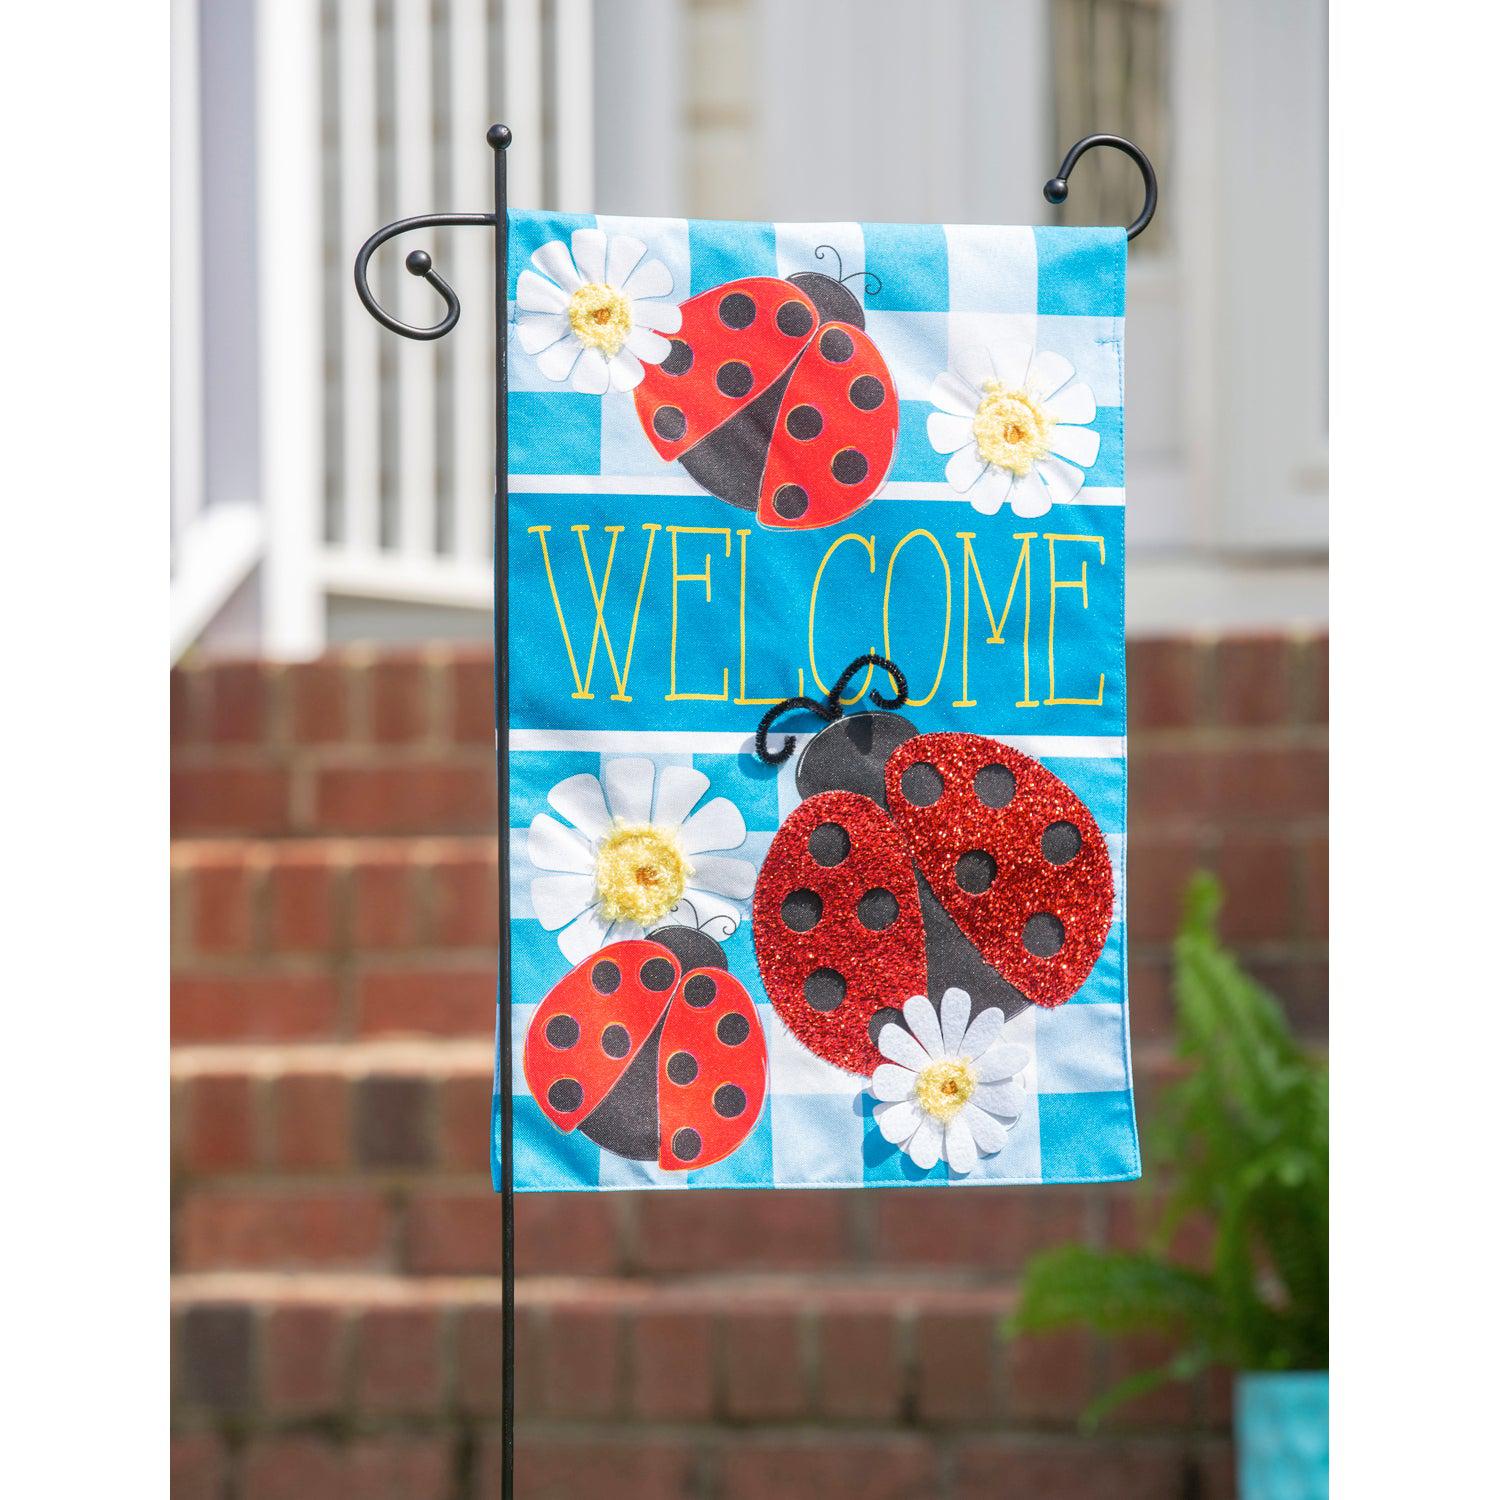 The Ladybug Plaid Welcome garden flag features a trio of ladybugs on a bright blue checked background with white daisies and the word "Welcome".